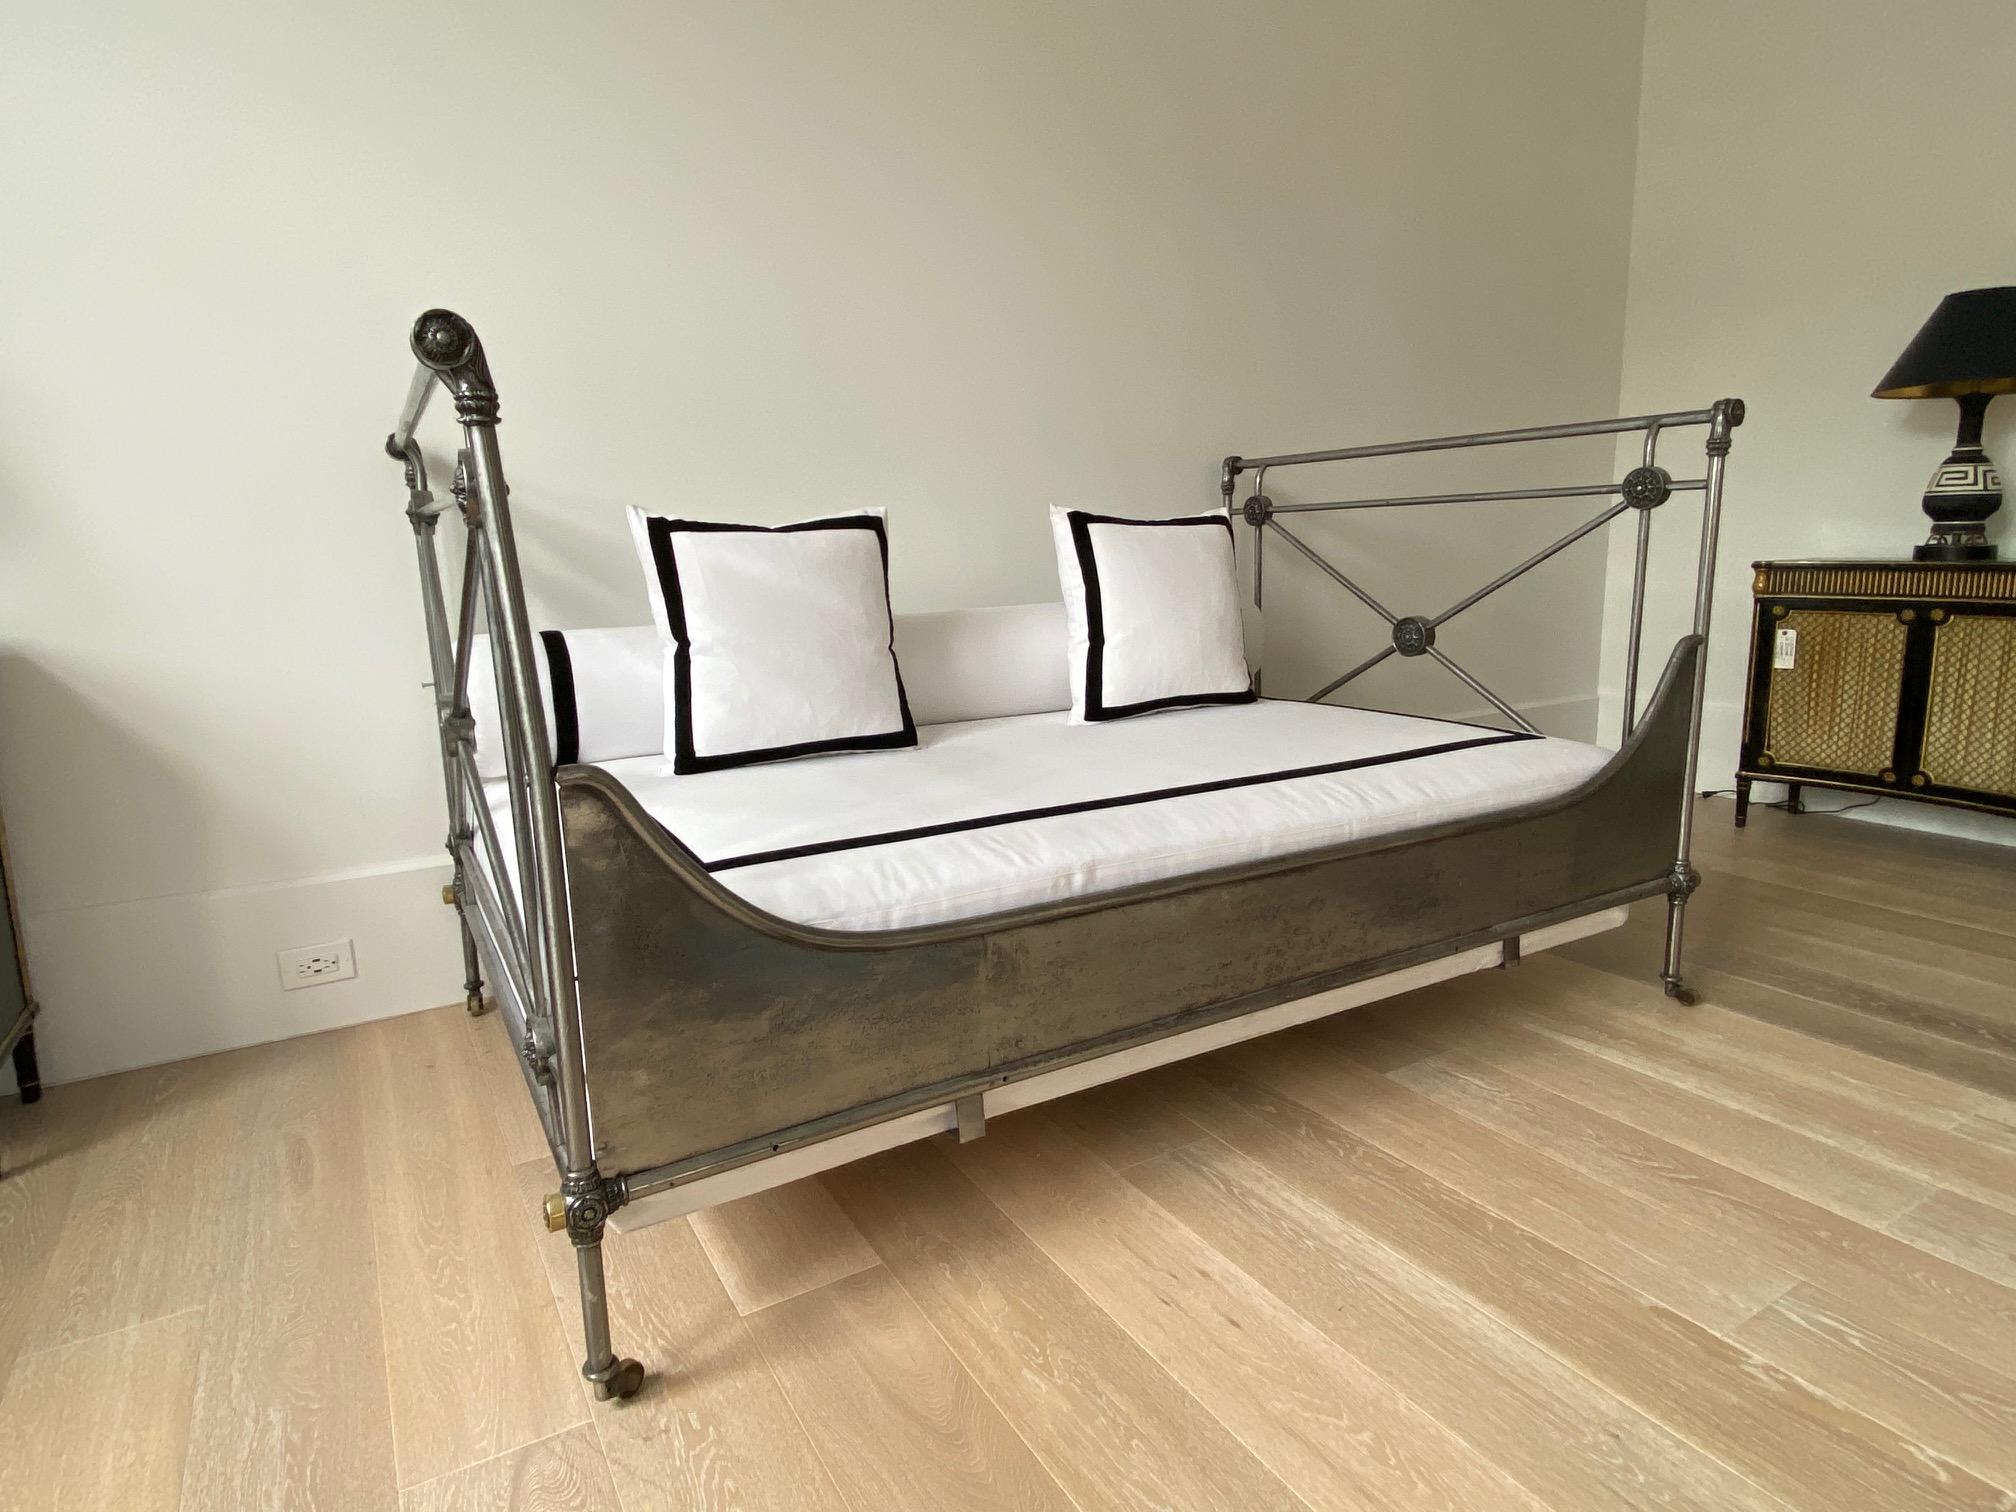 19th century French steel Campaign daybed with X form stretchers at both ends.